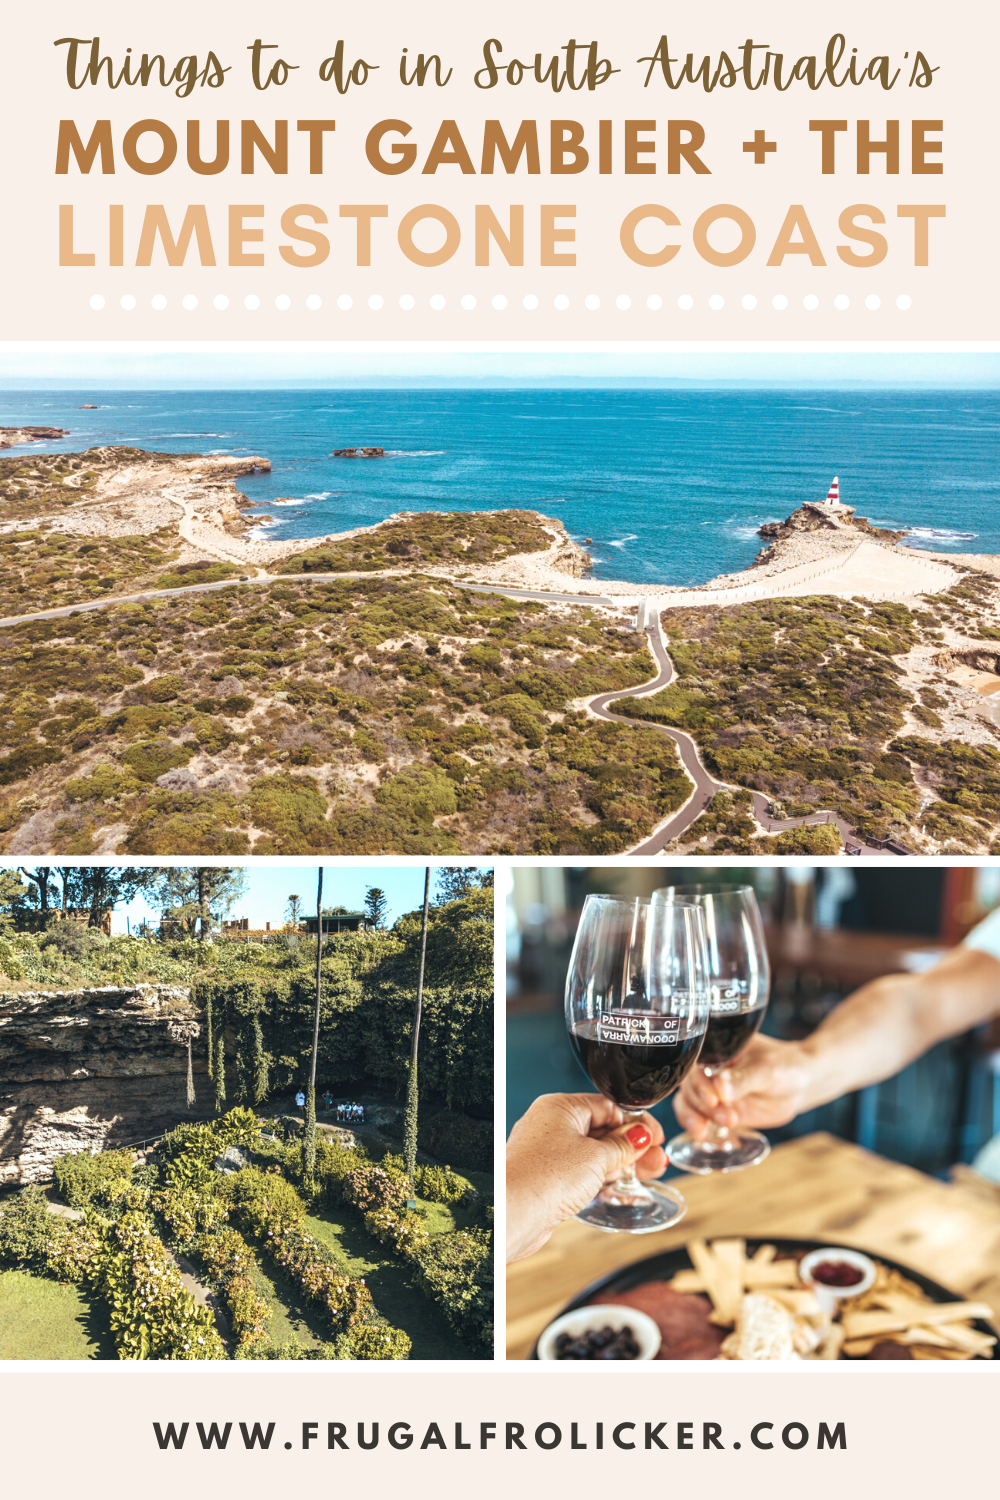 Things To Do In Mount Gambier & Limestone Coast, South Australia